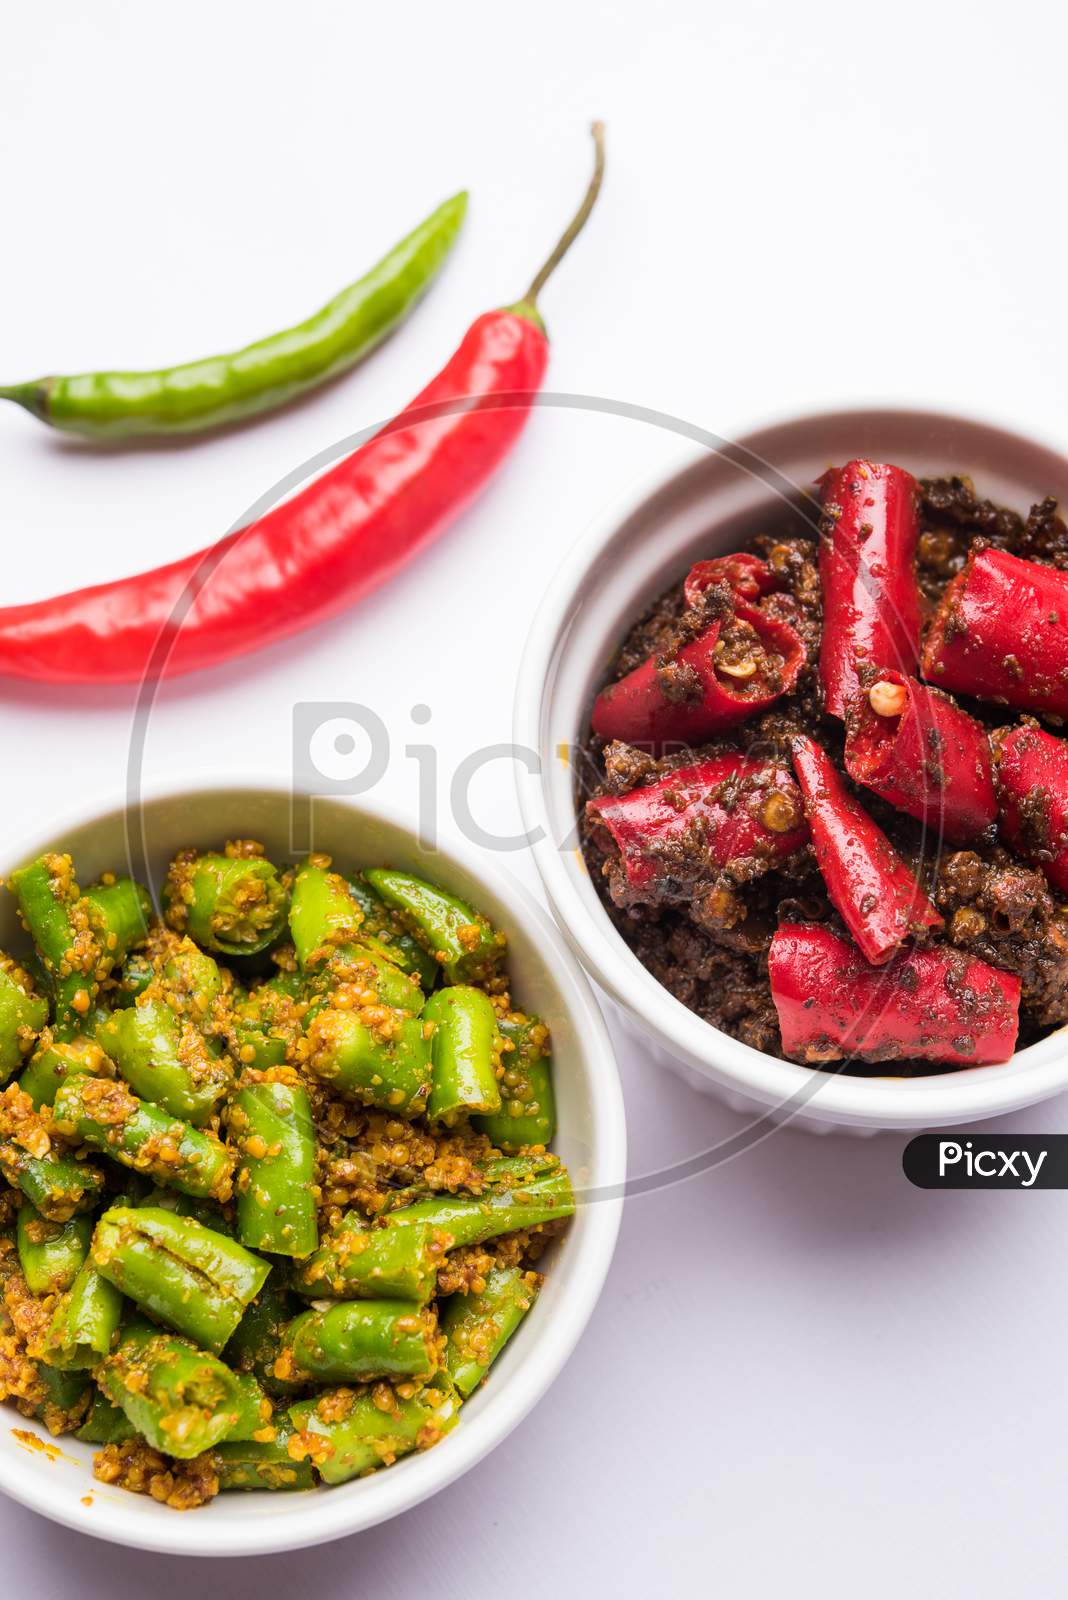 Red or Green Chilli/Mirchi Pickle or Achar